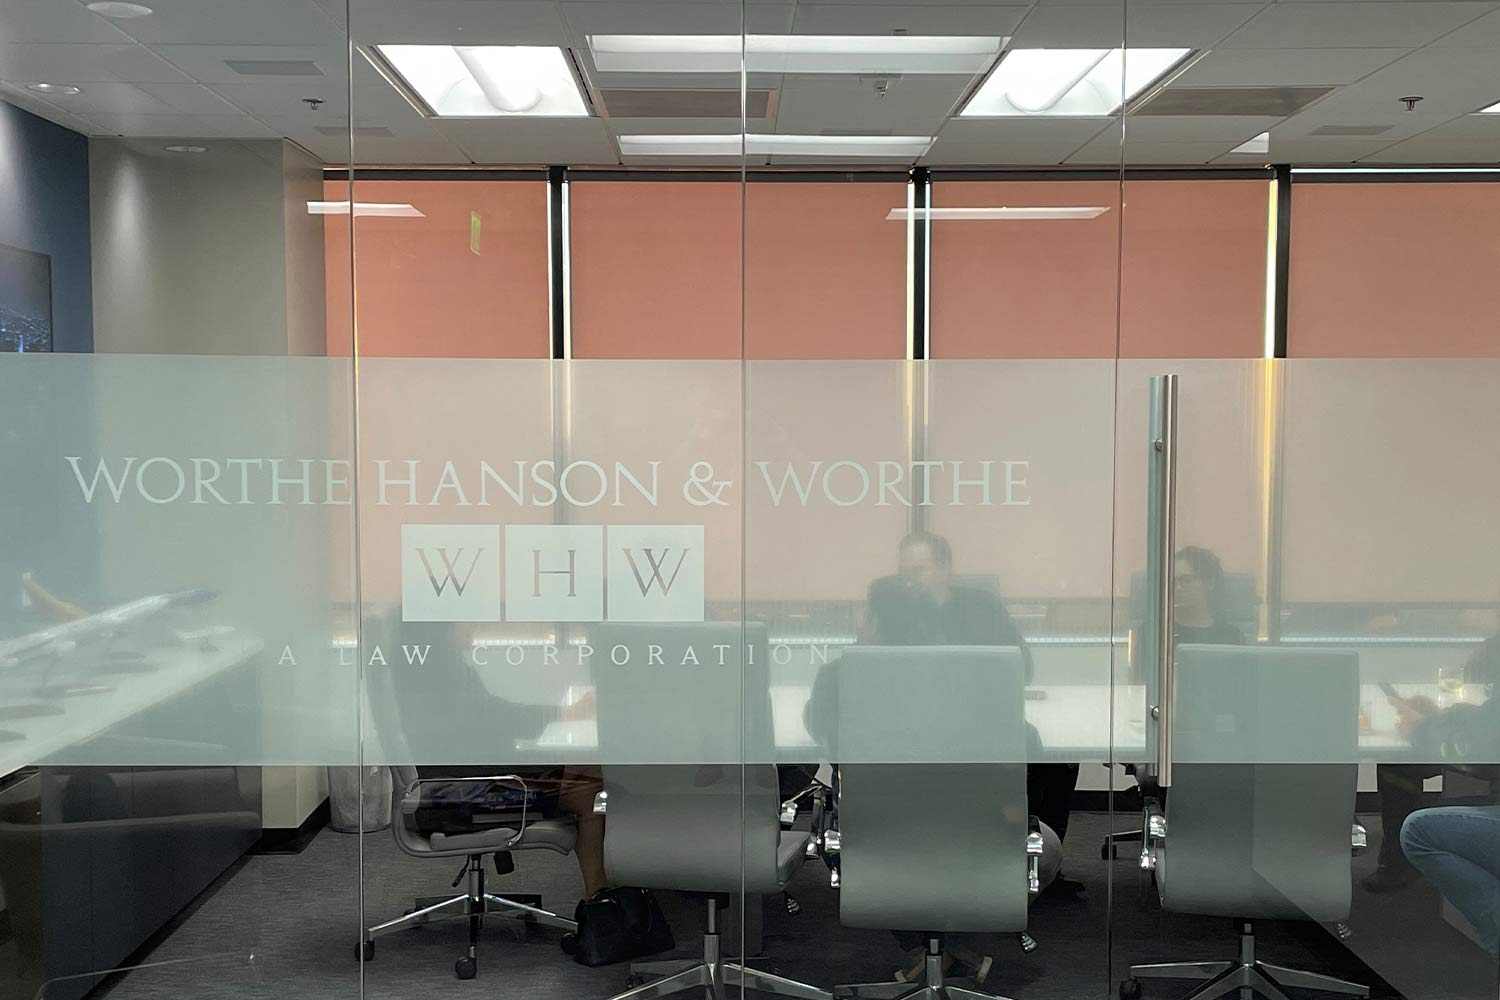 Interior Of The Office Of Worthe Hanson & Worthe A Law Corporation